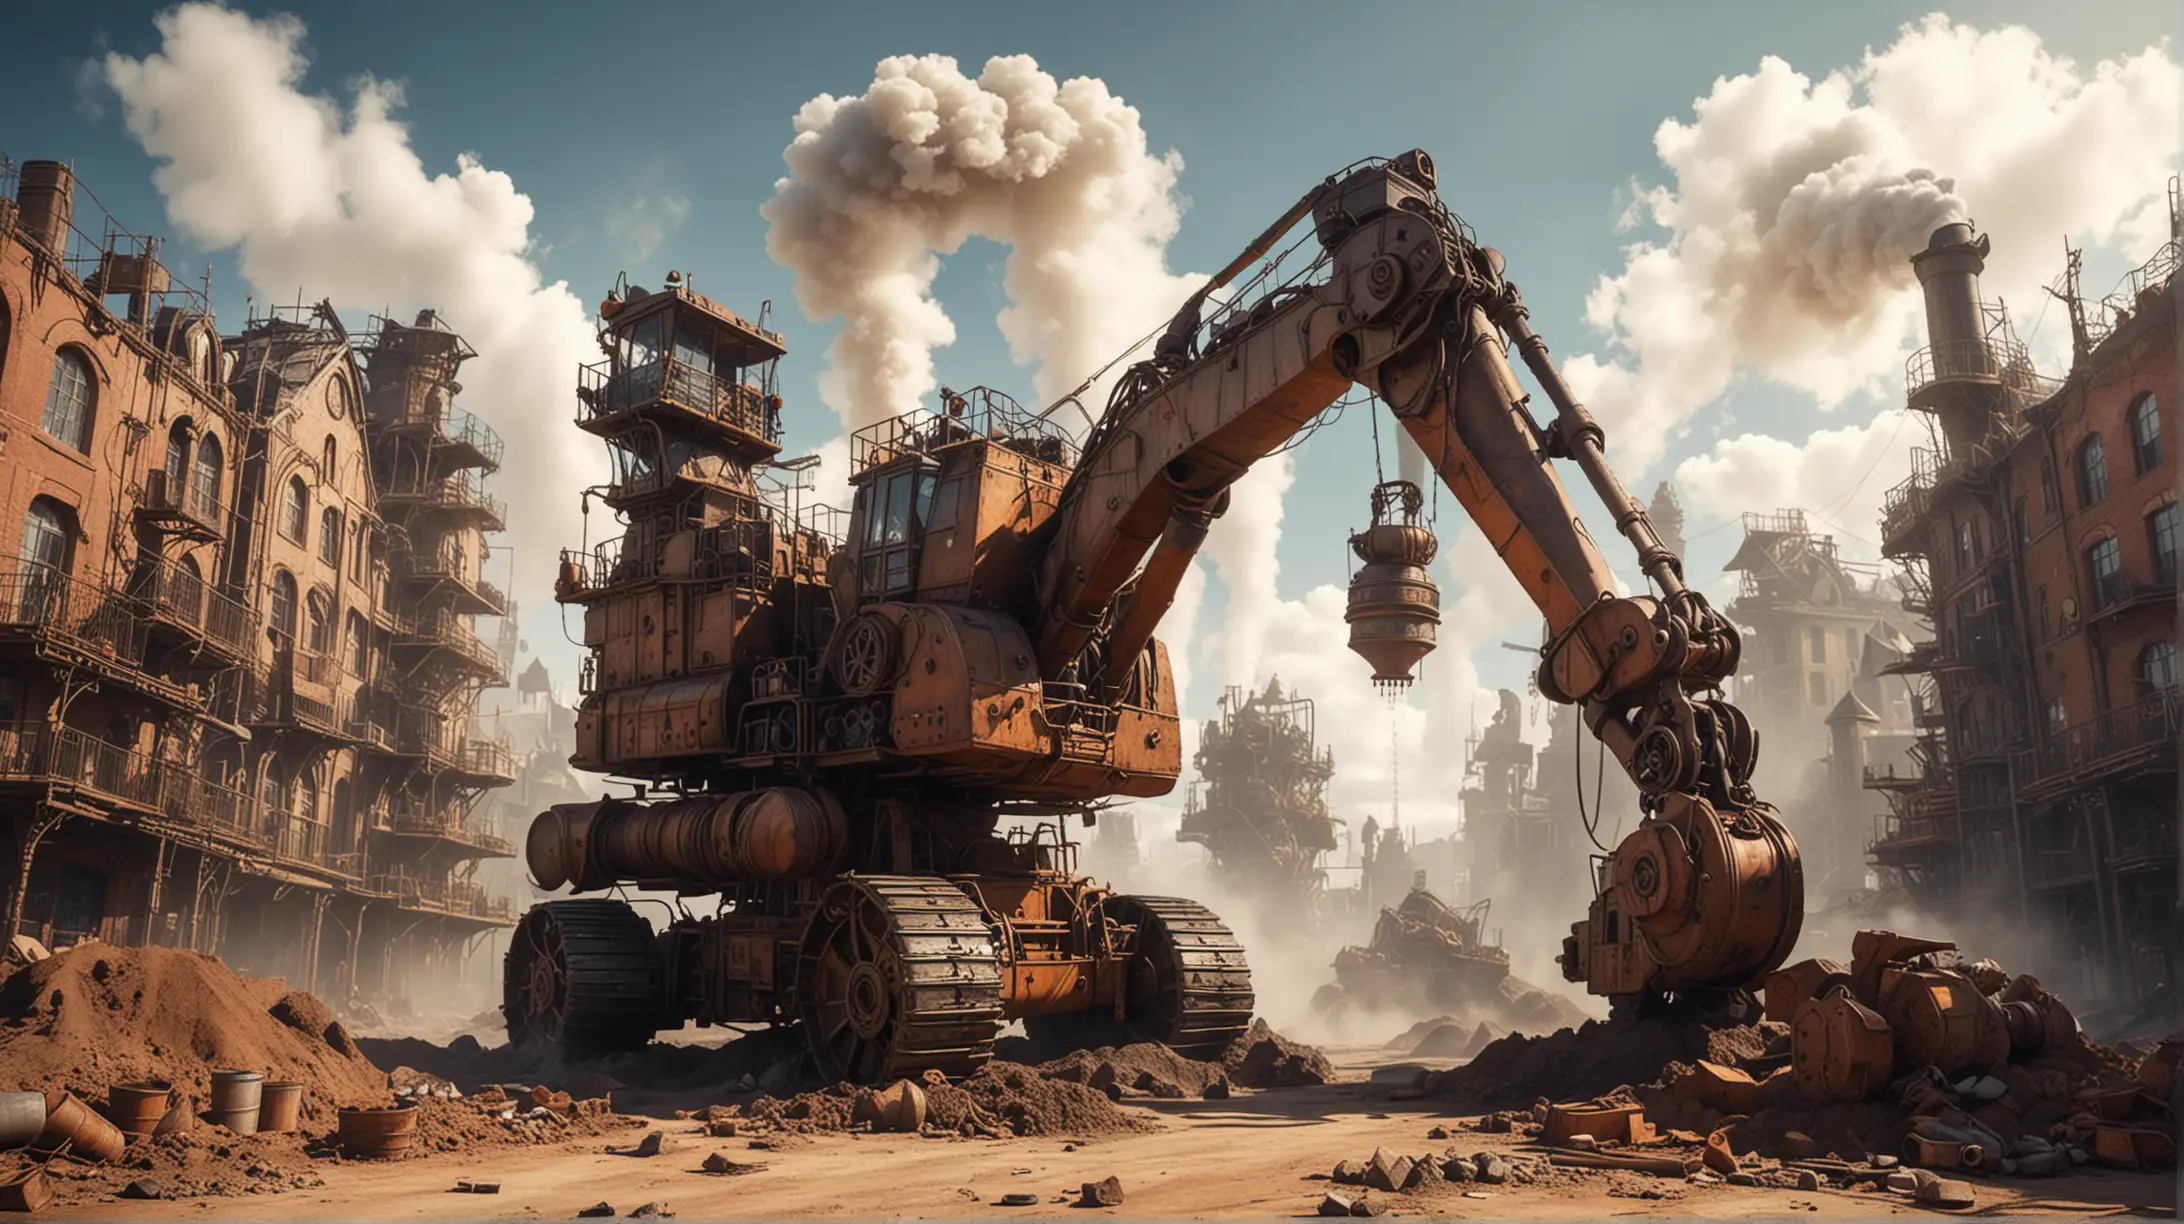 a giant steampunk excavator with many buckets makes an excavation in the center of a steampunk city, steam, smoke, sunny